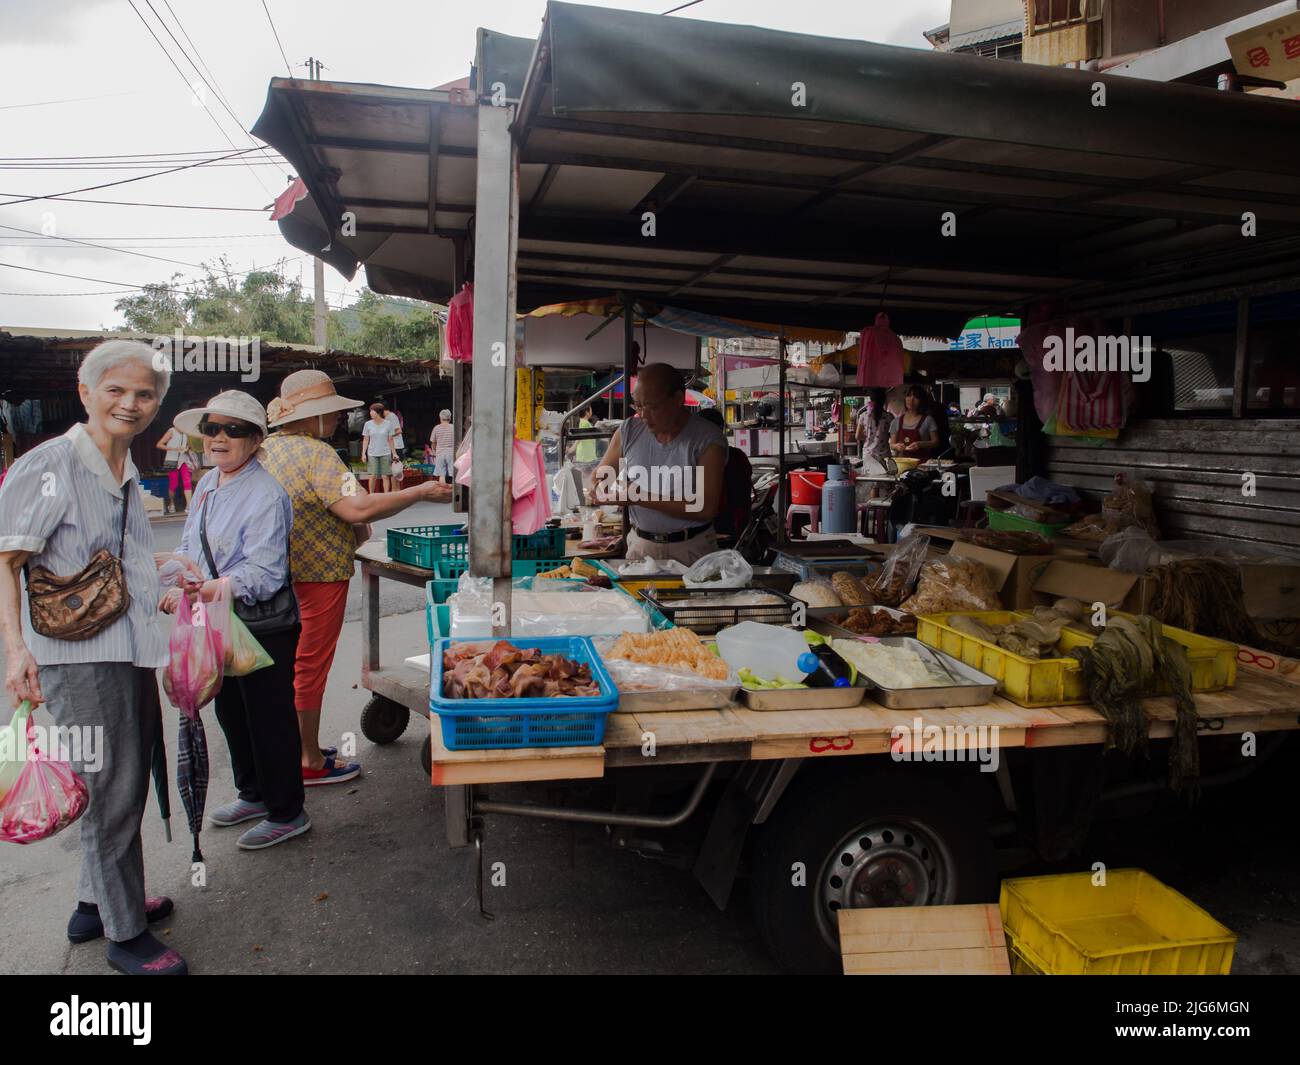 Taipei, Taiwan - October 04, 2016: Typical local bazaar in Taiwan with lots of local products. Asia Stock Photo